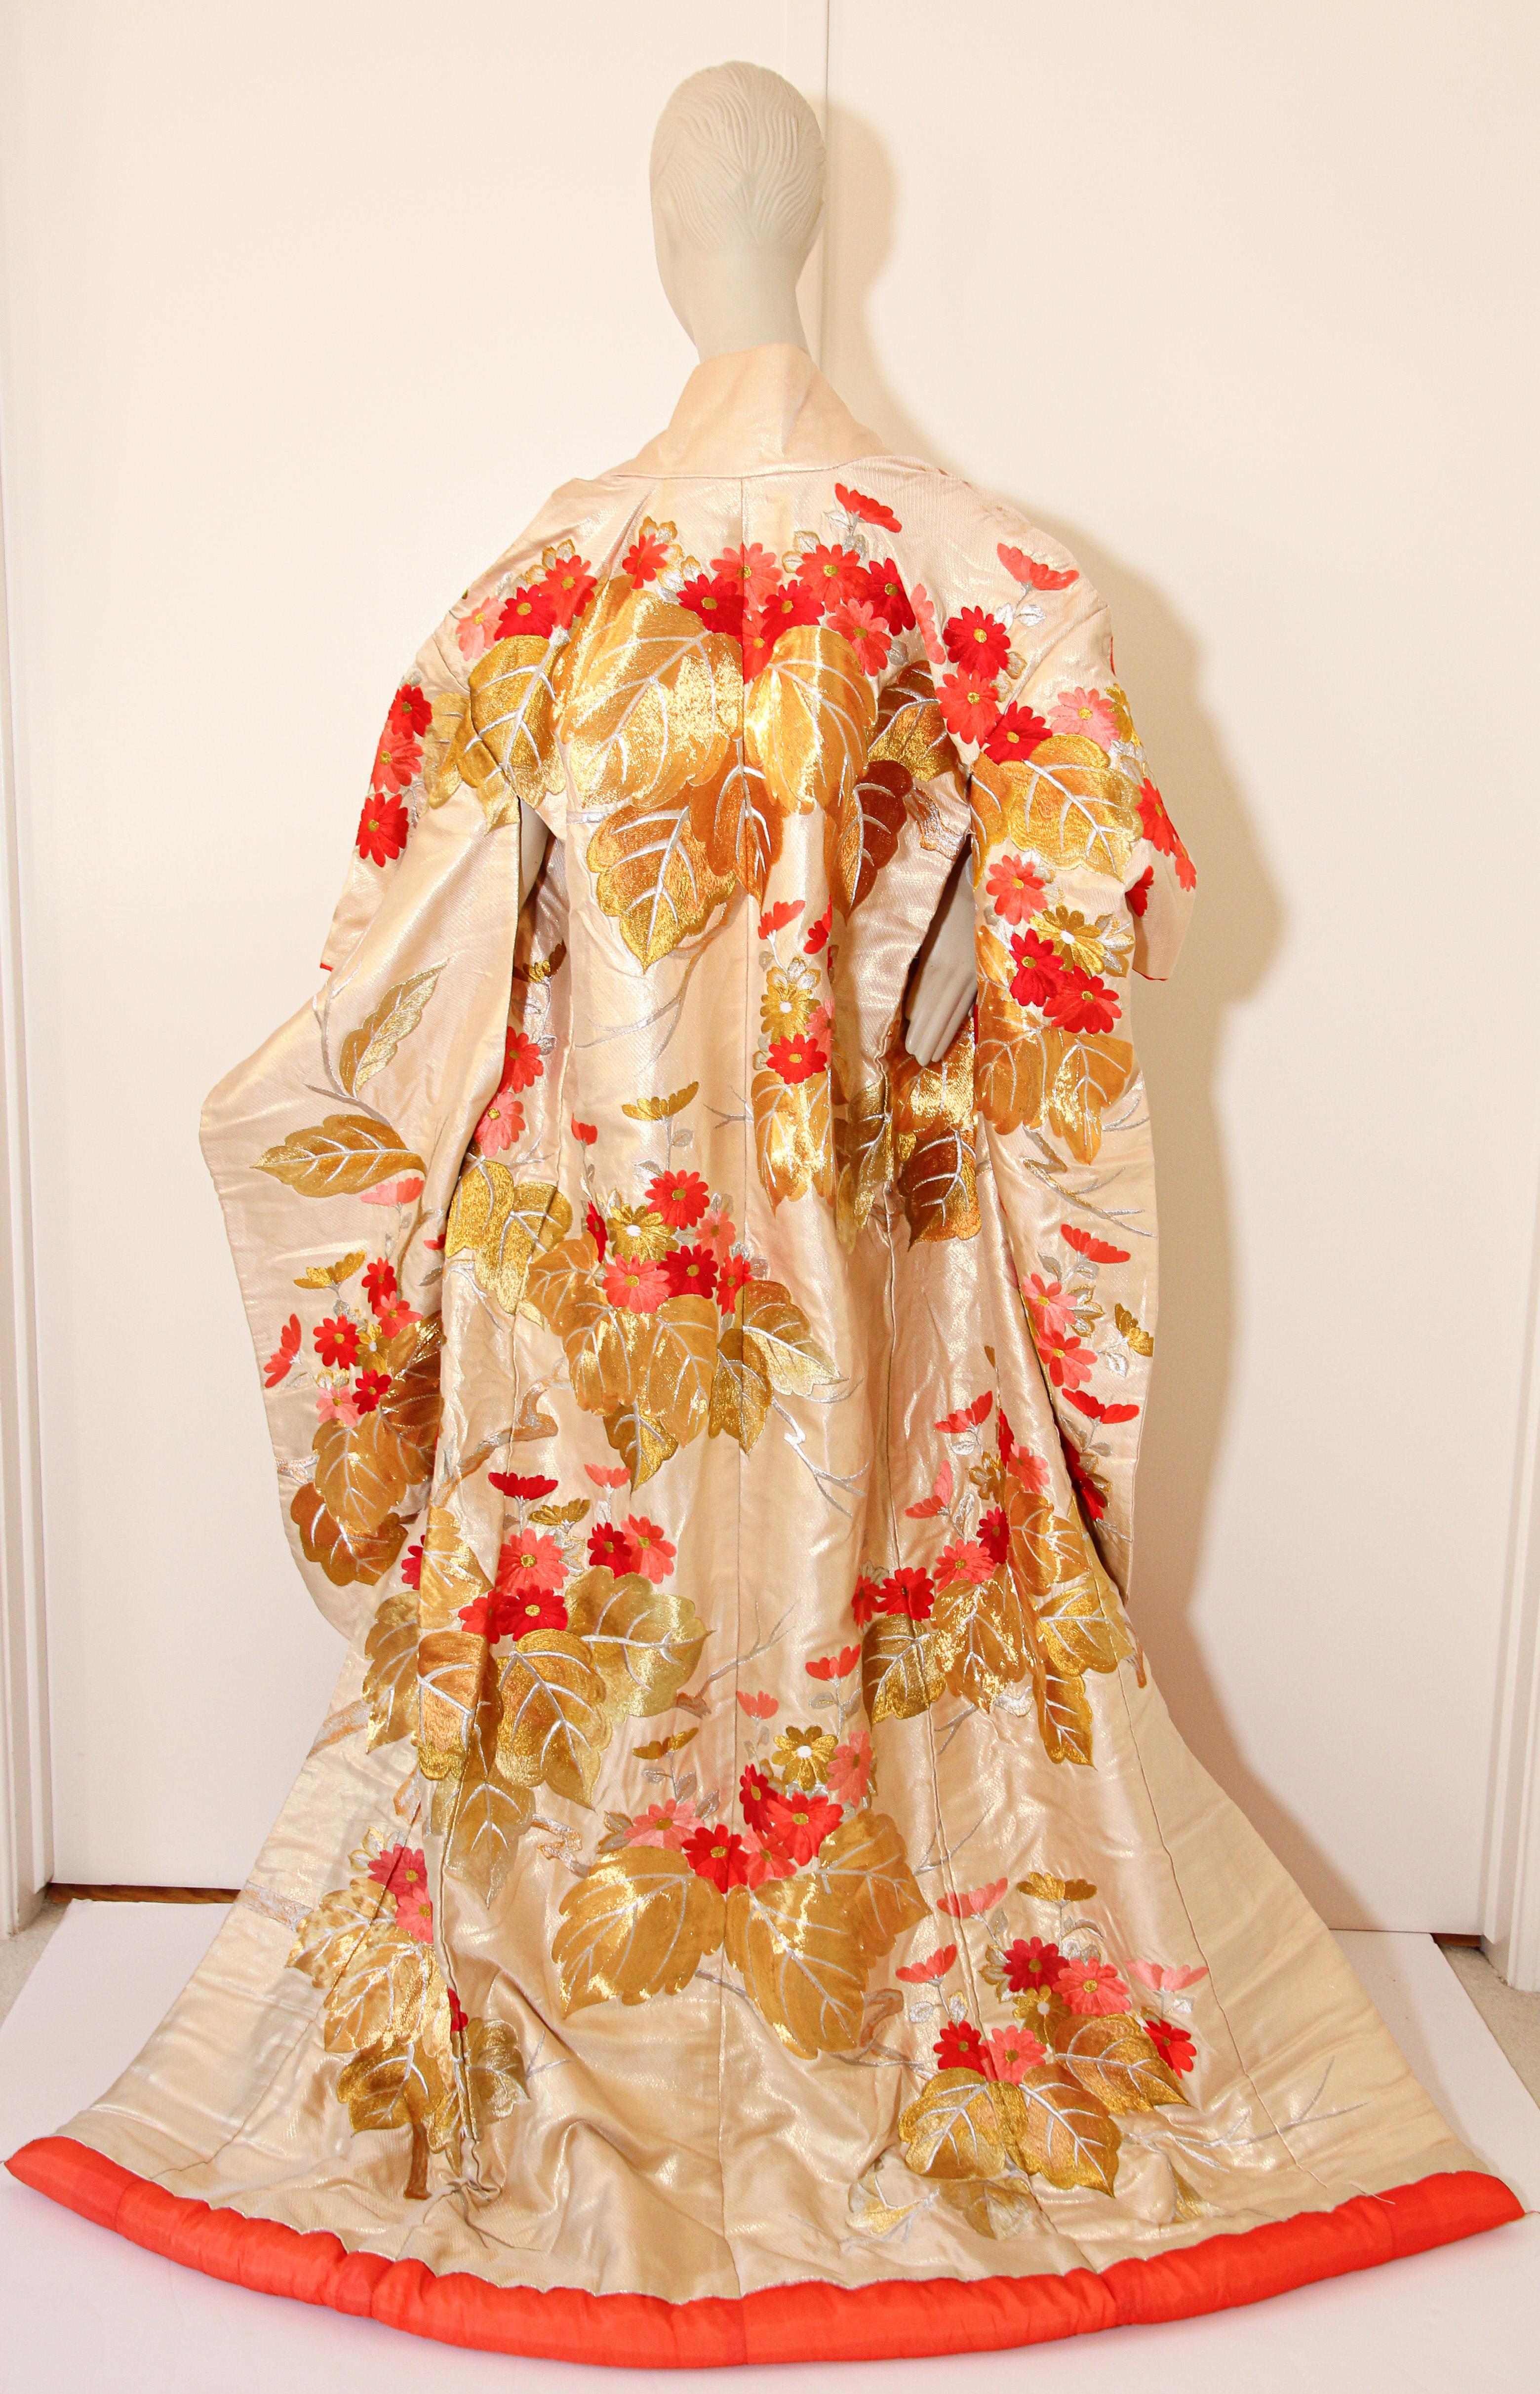 A vintage ivory color silk brocade collectable Japanese ceremonial wedding kimono.
One of a kind handcrafted fabulous museum quality ceremonial piece in pure silk with intricate detailed hand-embroidery throughout accented with floral gold and